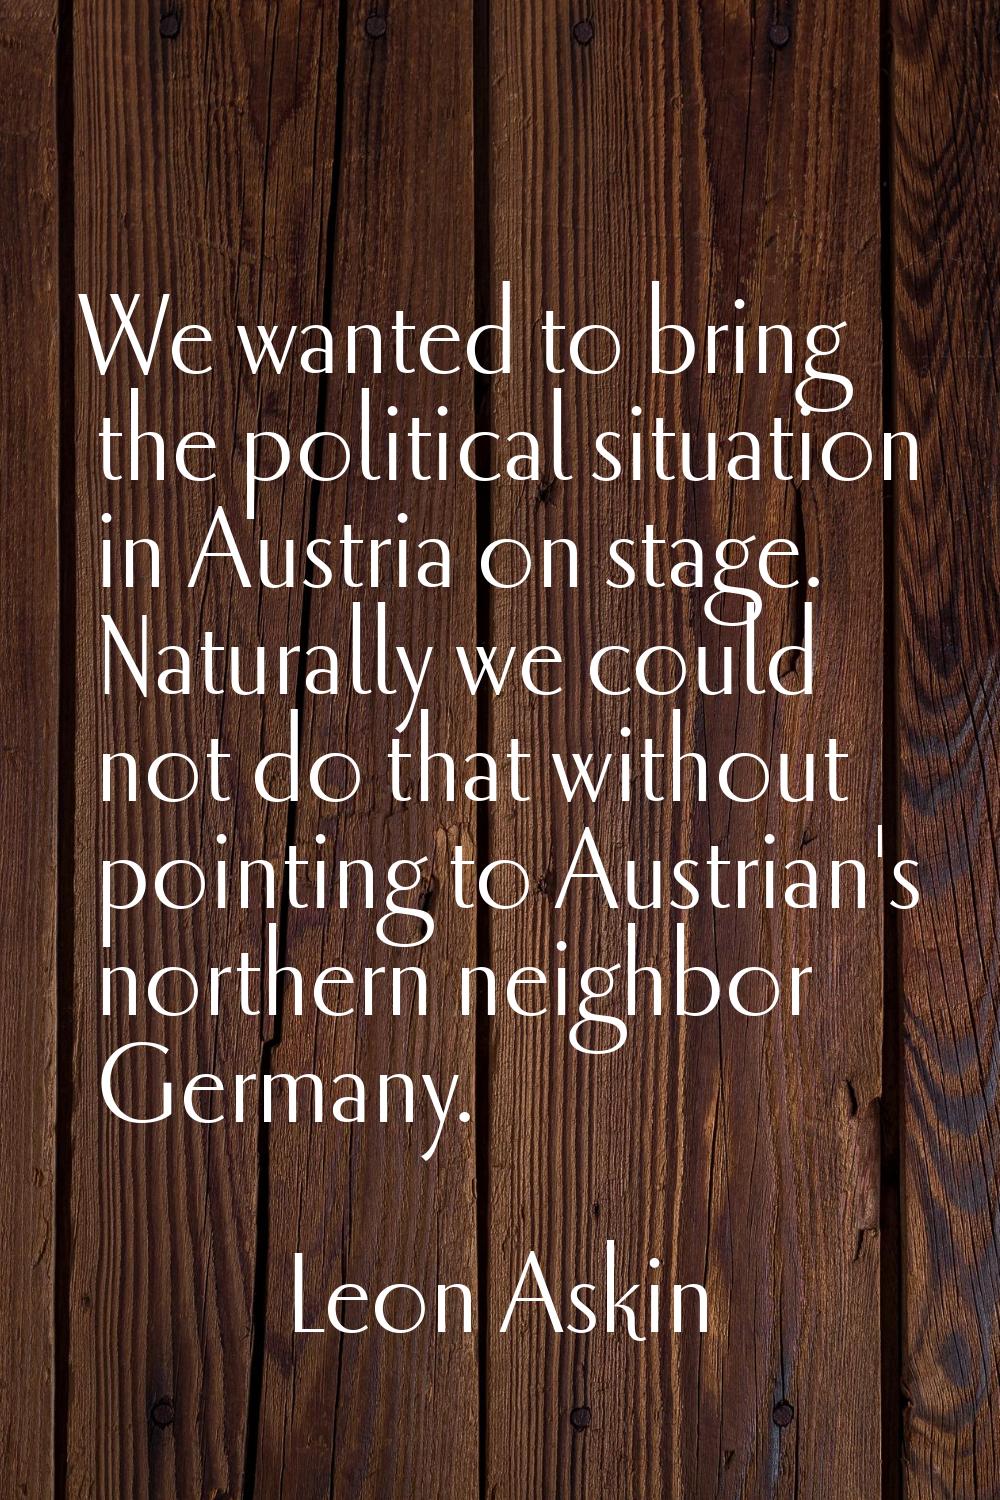 We wanted to bring the political situation in Austria on stage. Naturally we could not do that with